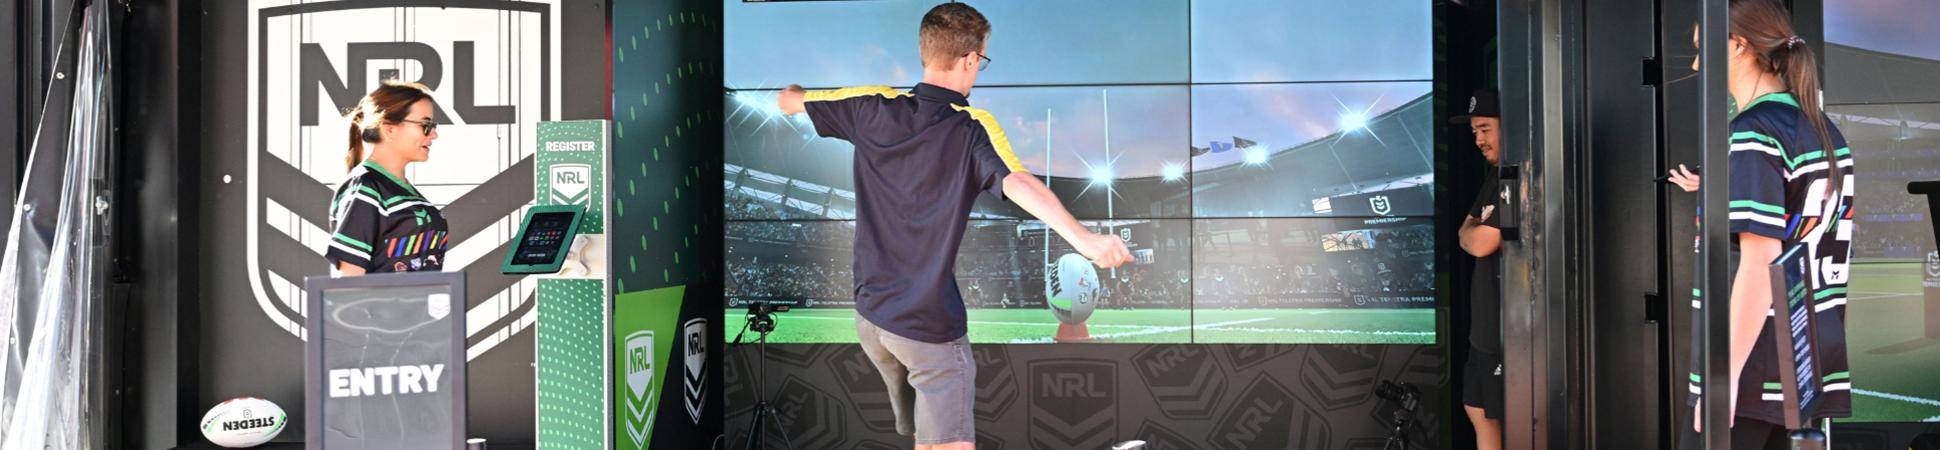 Photo of young people interacting with a virtual reality NRL ball and goal